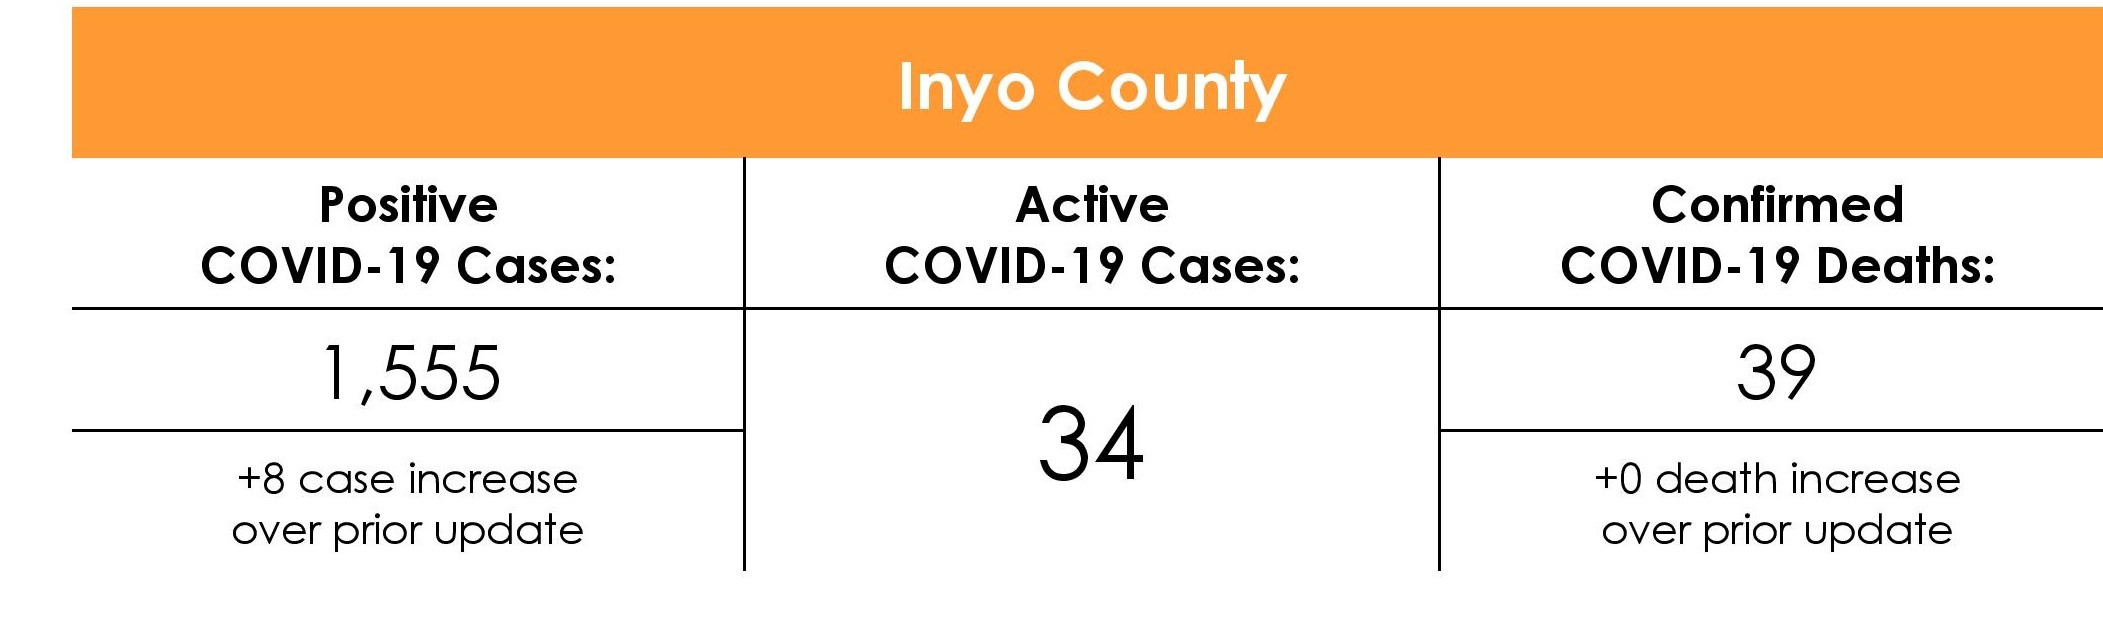 Inyo County COVID-19 Case Rate as of August 27th, 2021